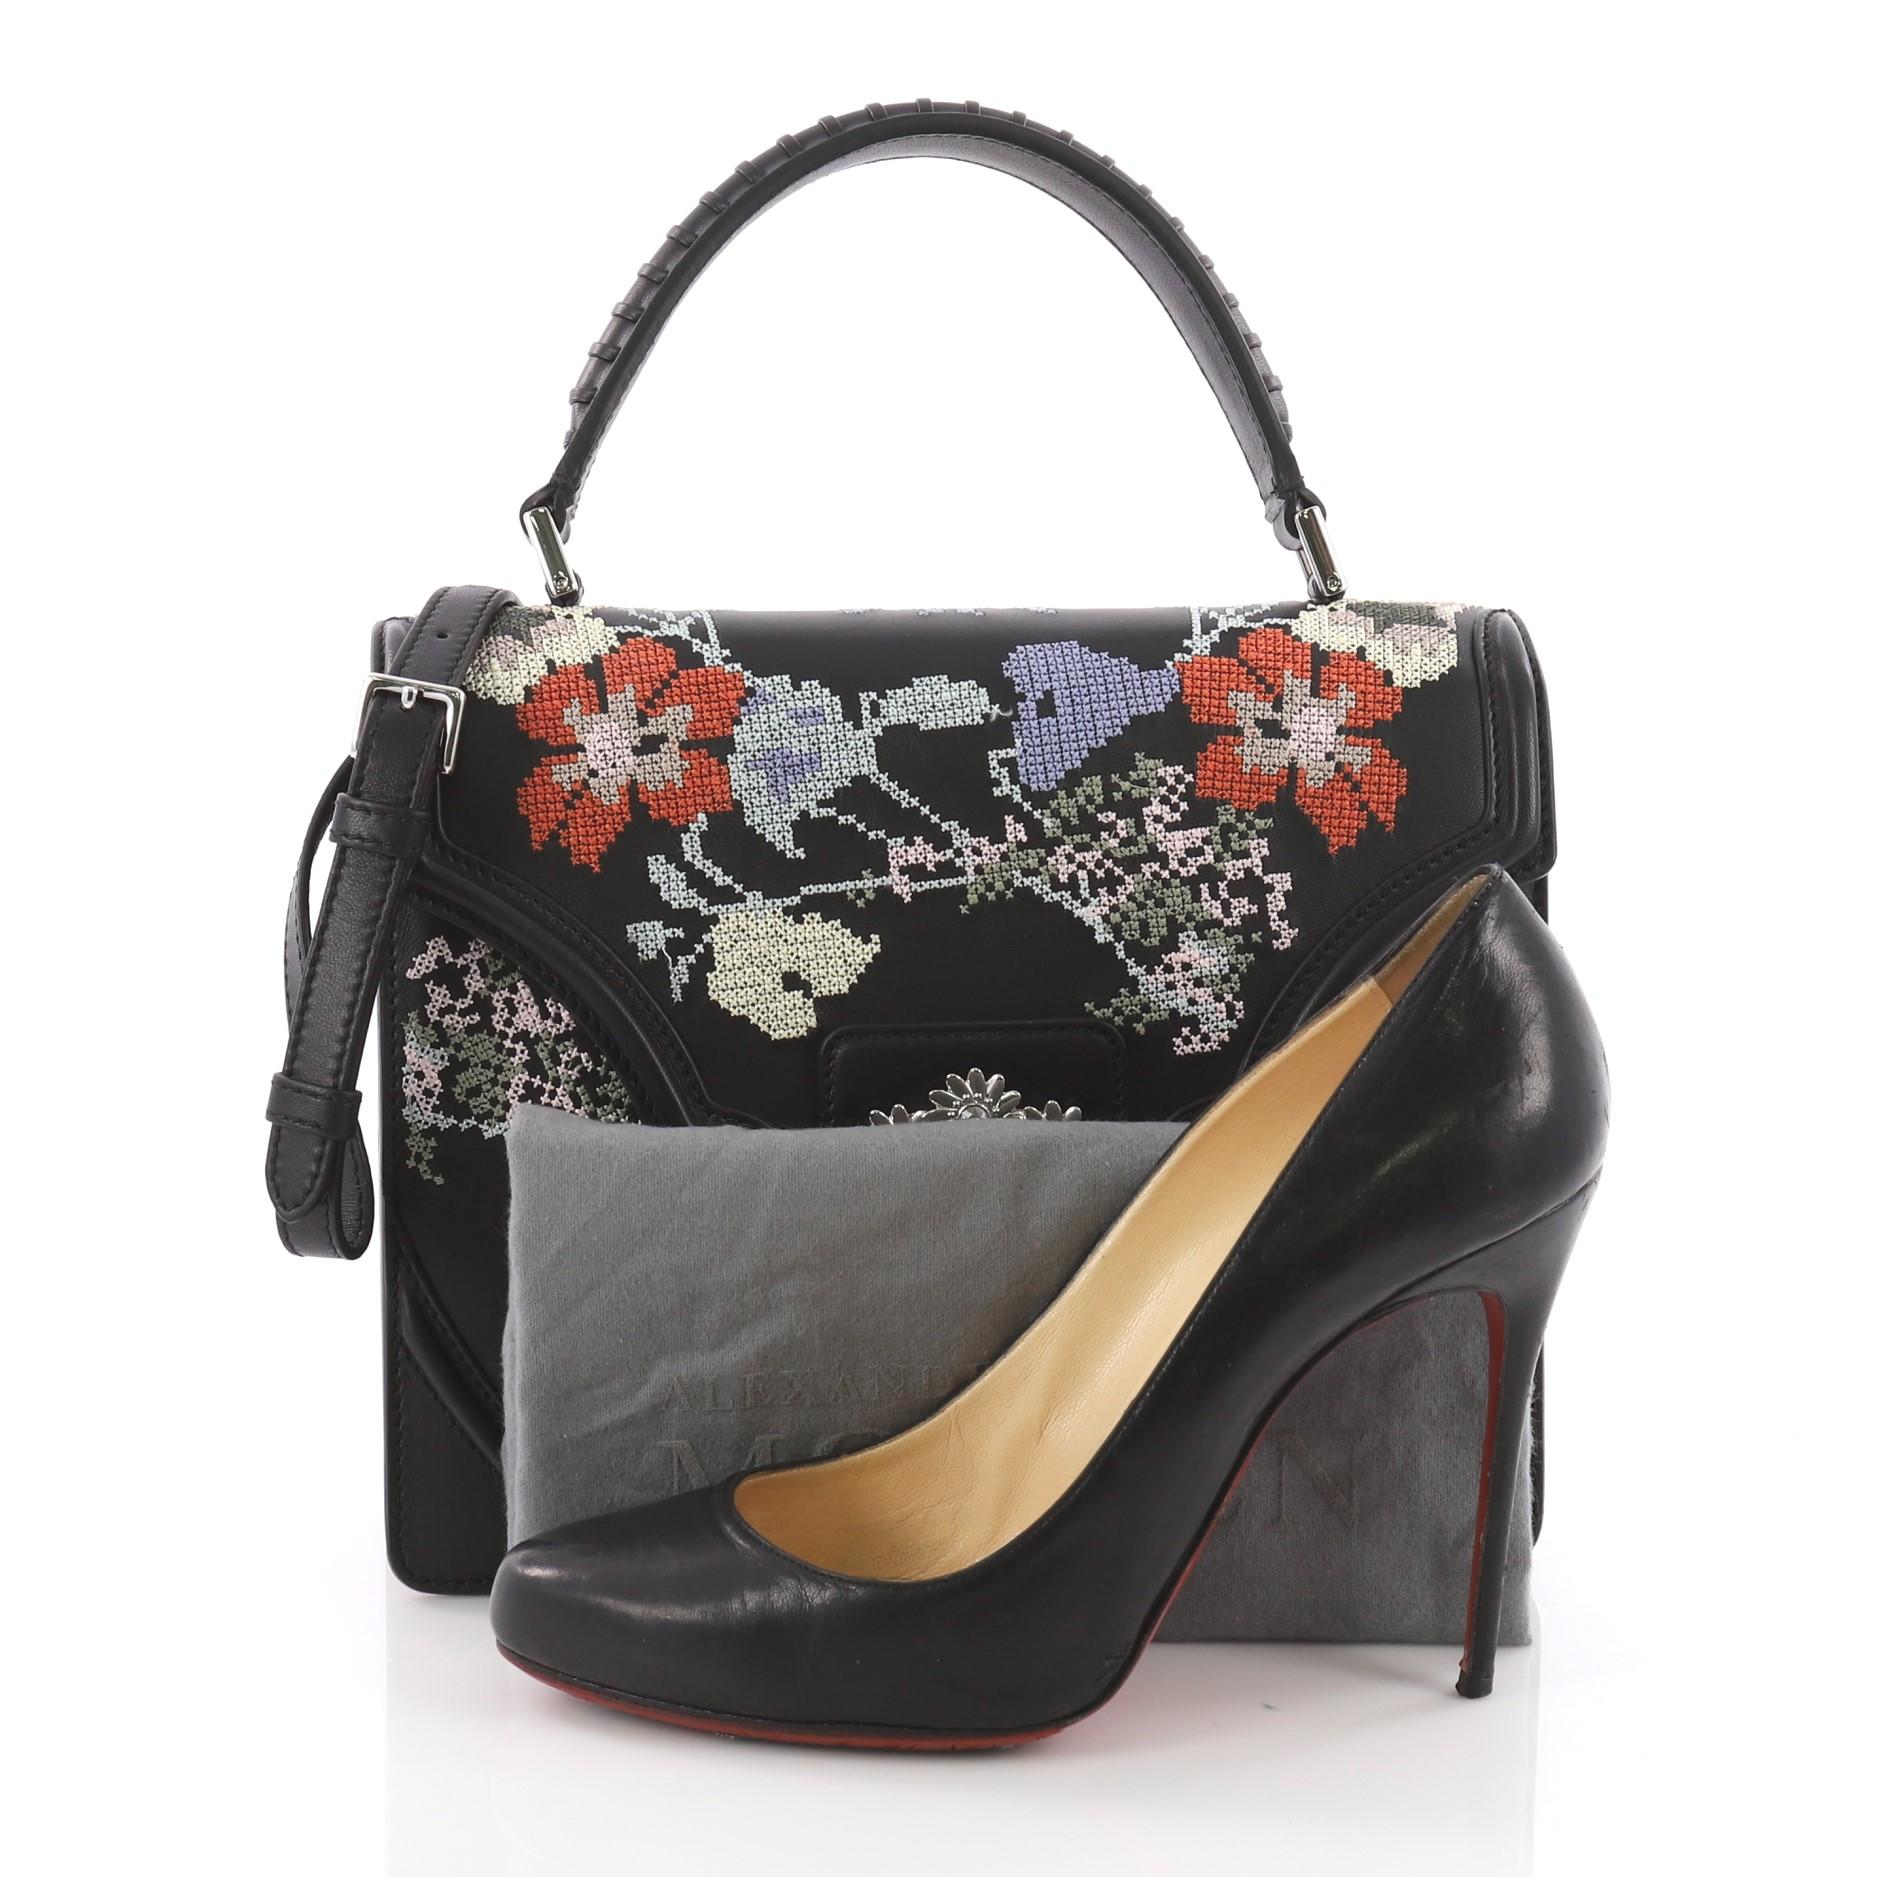 This authentic Alexander McQueen Flower Satchel Embroidered Leather Medium will definitely add a touch of sartorial edge to any outfit. Crafted in black leather, this satchel features a leather top handle, leather strap, embroidered floral detailing